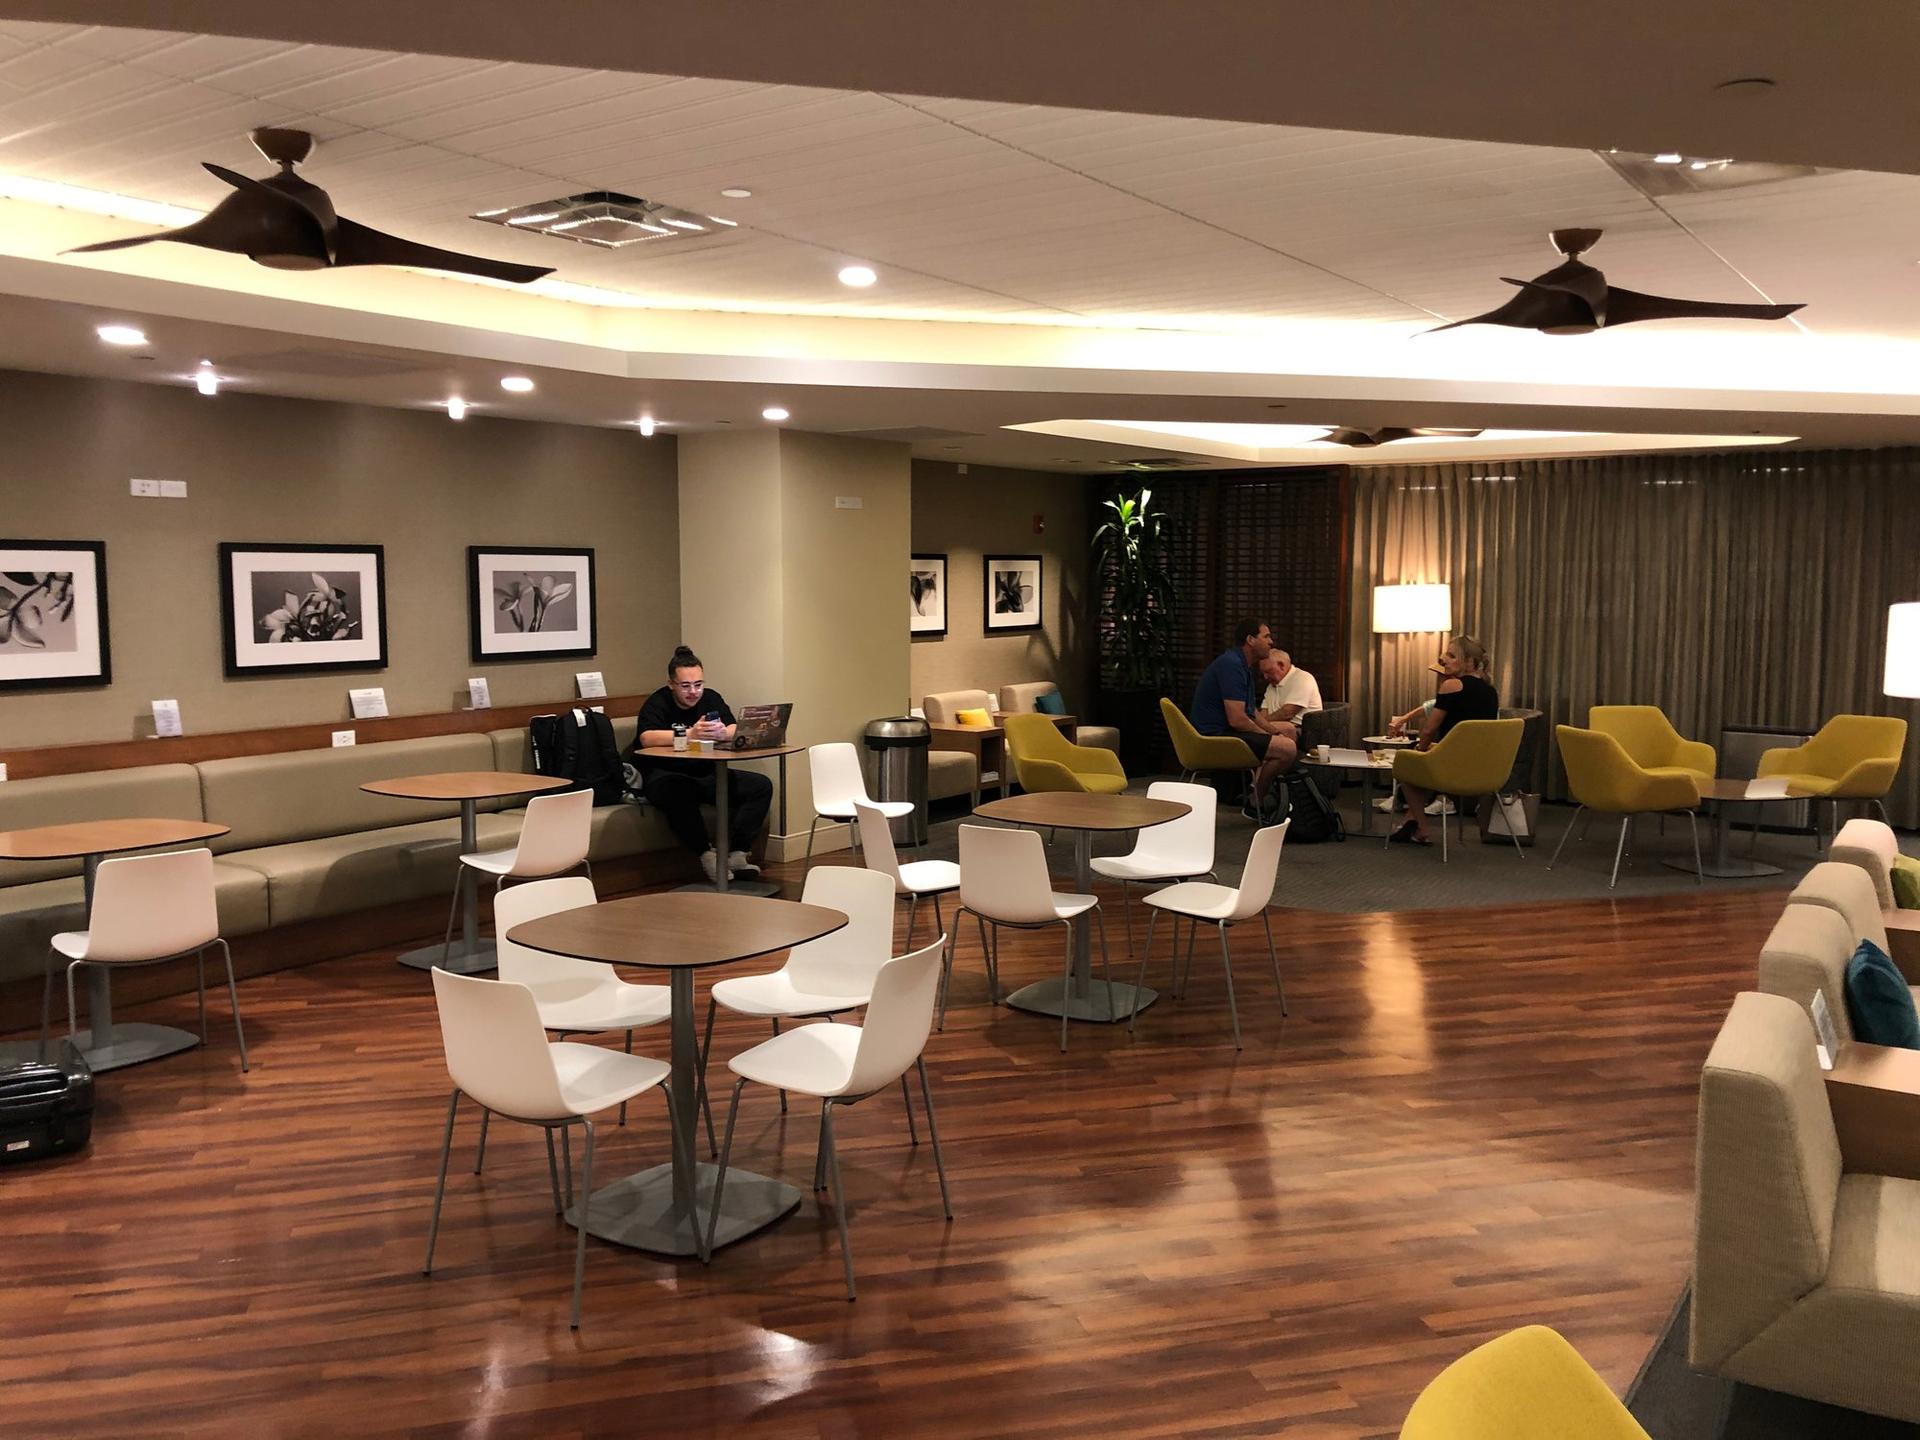 Hawaiian Airlines The Plumeria Lounge image 37 of 41